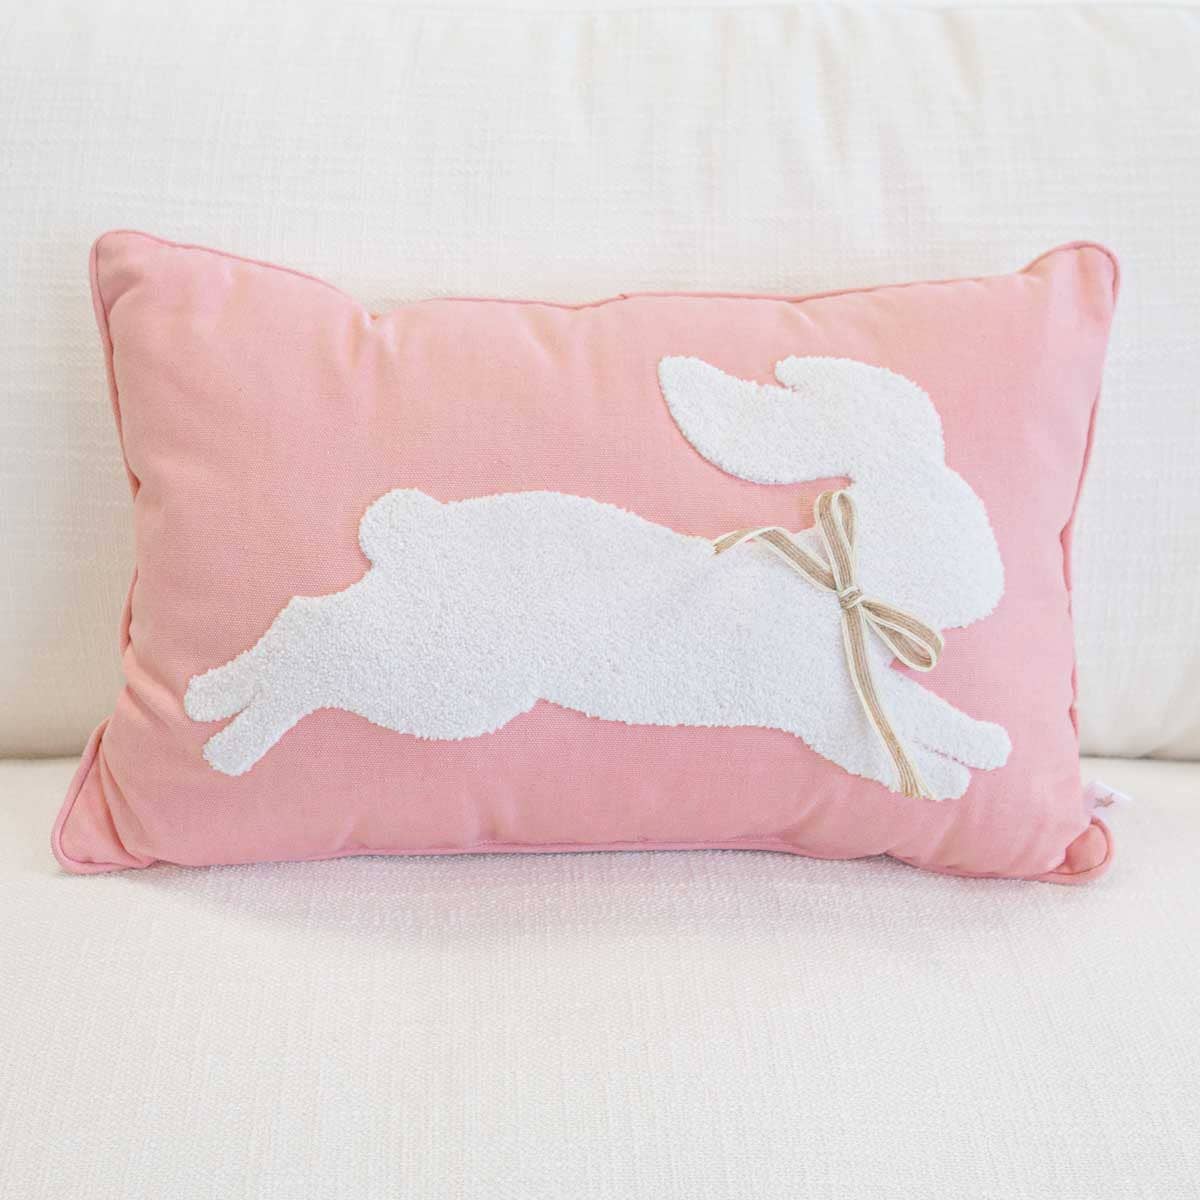 The Royal Standard - Leaping Bunny Embroidered Lumbar Pillow   Light Pink/White   13x20